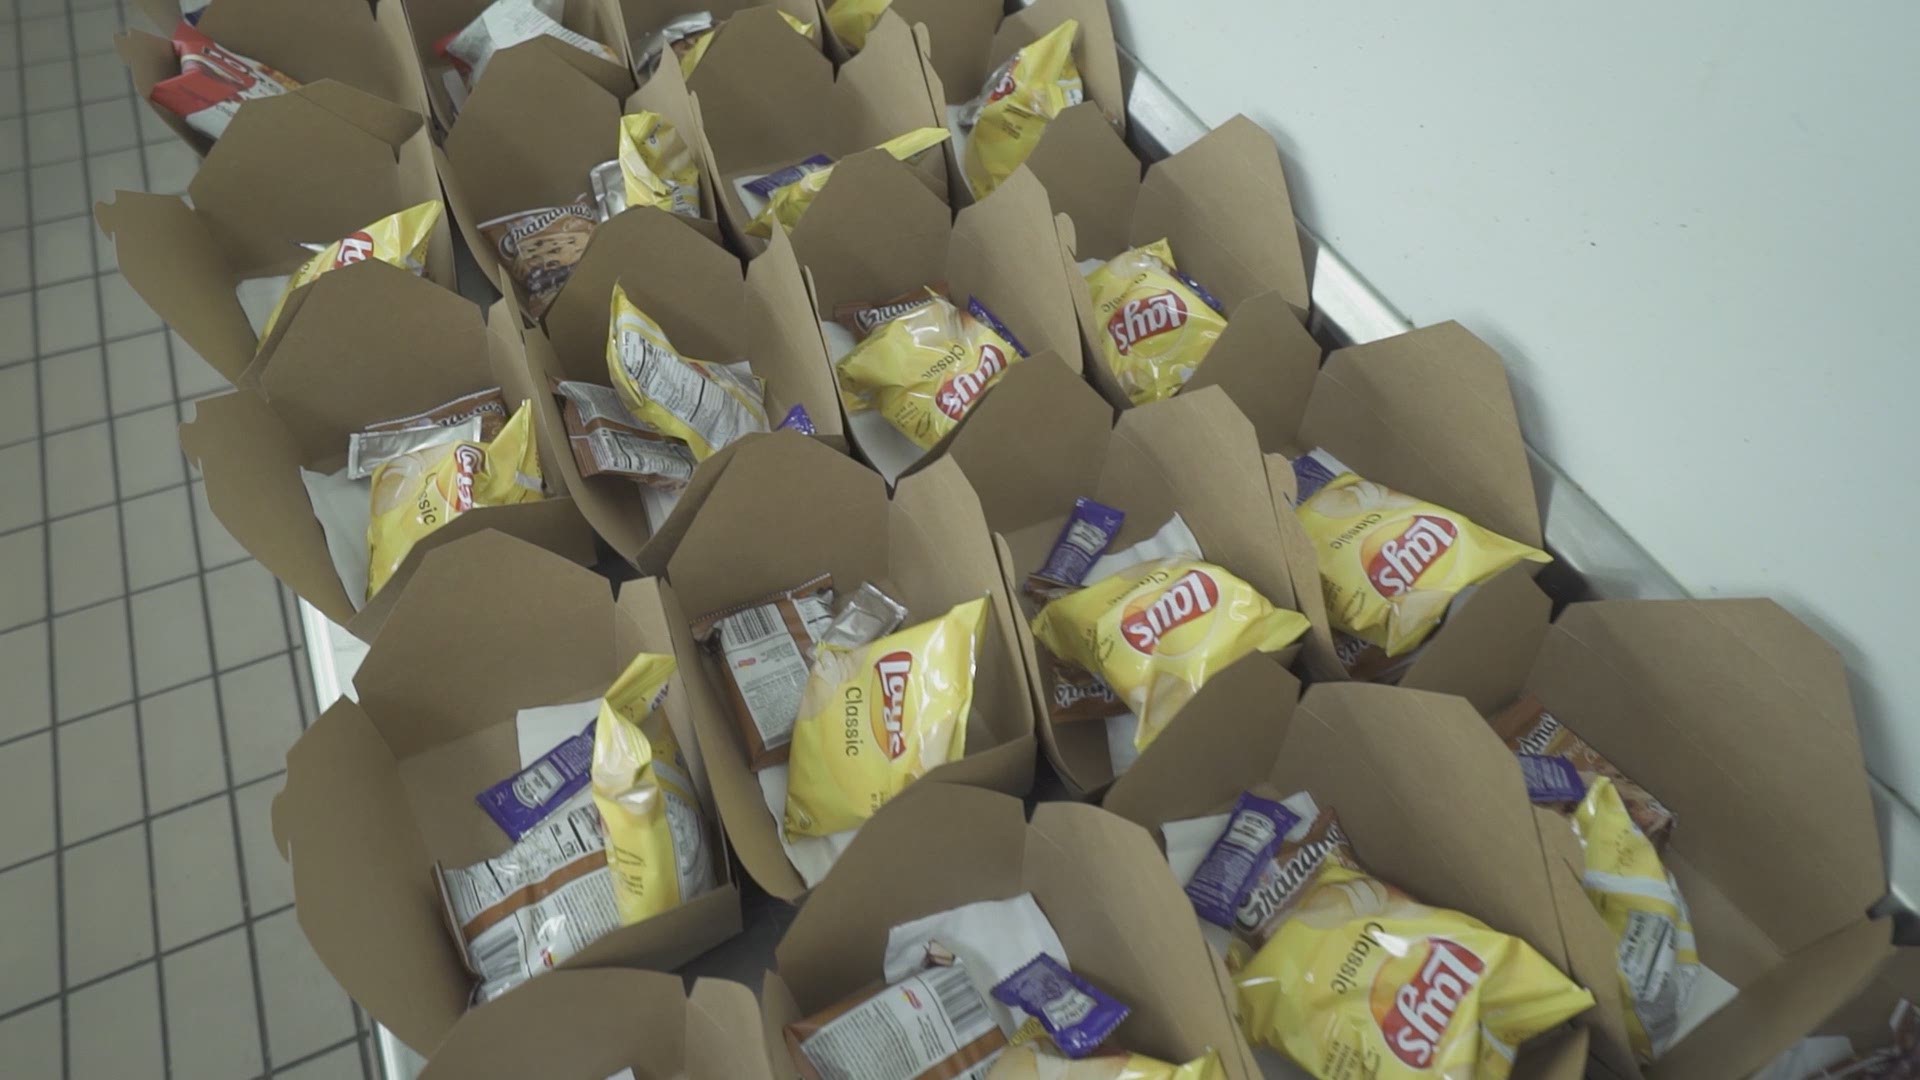 Purina is donating more than 400 boxed lunches to local first responders three days a week for the next month.